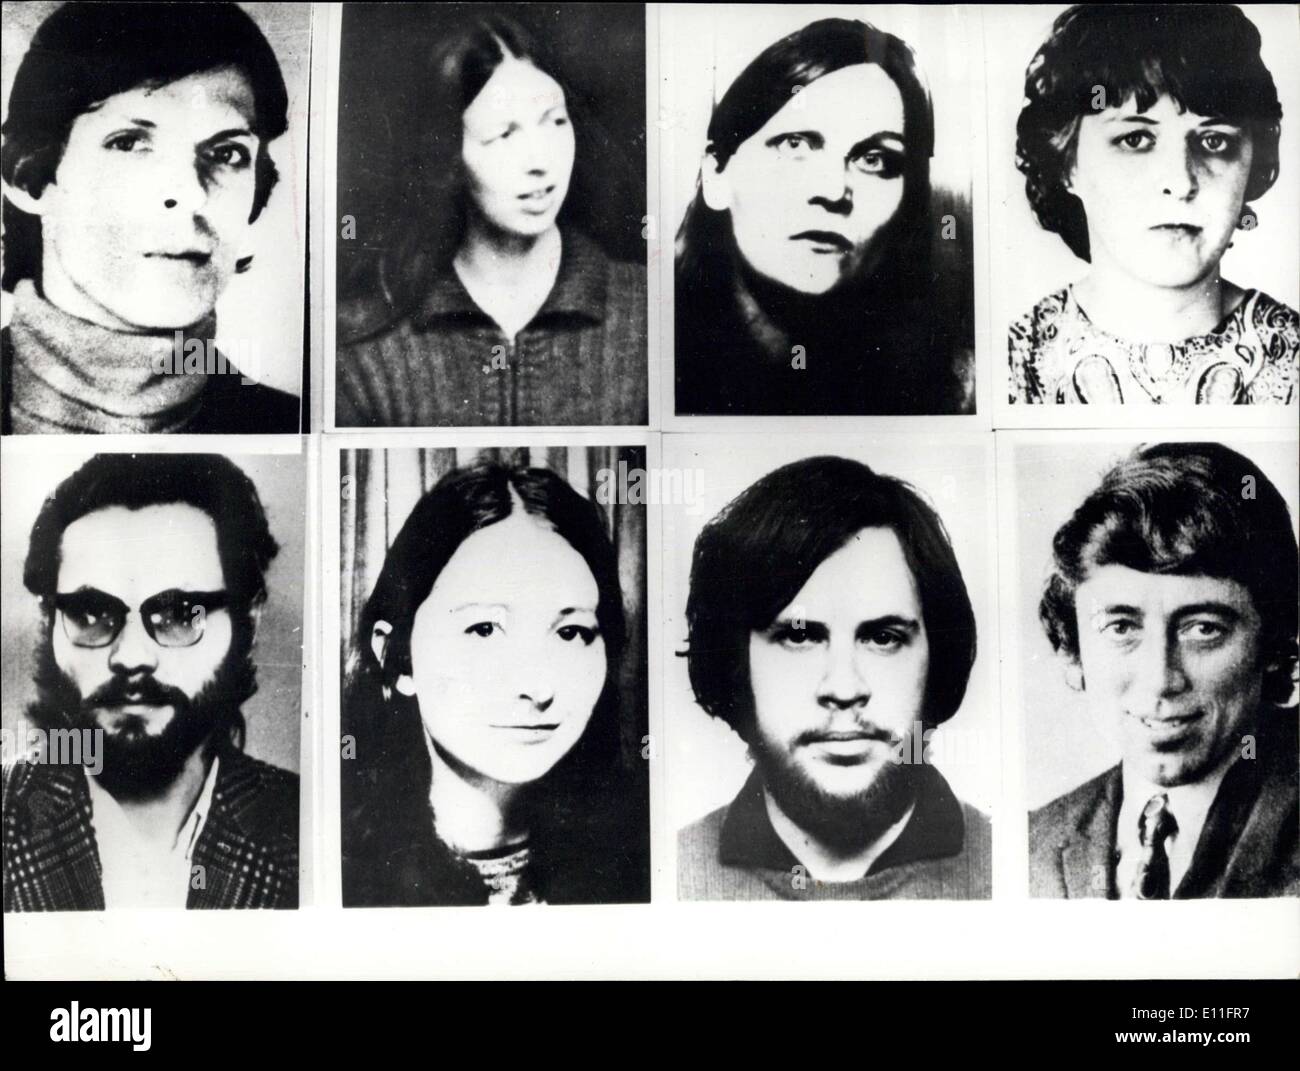 Oct. 25, 1977 - The Biggest Search In History ForThe Killers Of Dr Schleyer: On the very same night of October 19th, when the body of Hanns-Marting Schleyer was found, the FGR started the biggest search in history of Germany. Wanted are 16 terrorists in connection with the murder of Schleyer. Thousands of posters and handbills have been handed out by the police. Photo Shows: L-R Christian Klar, Elisabeth Von Dyck, Brigitte Mohnhaupt, and Silks Maier-Witt; Bottom rolf Clemens Wagner, Friedericke Krabbe, Rolf Heissler, and Joerg Lang Stock Photo